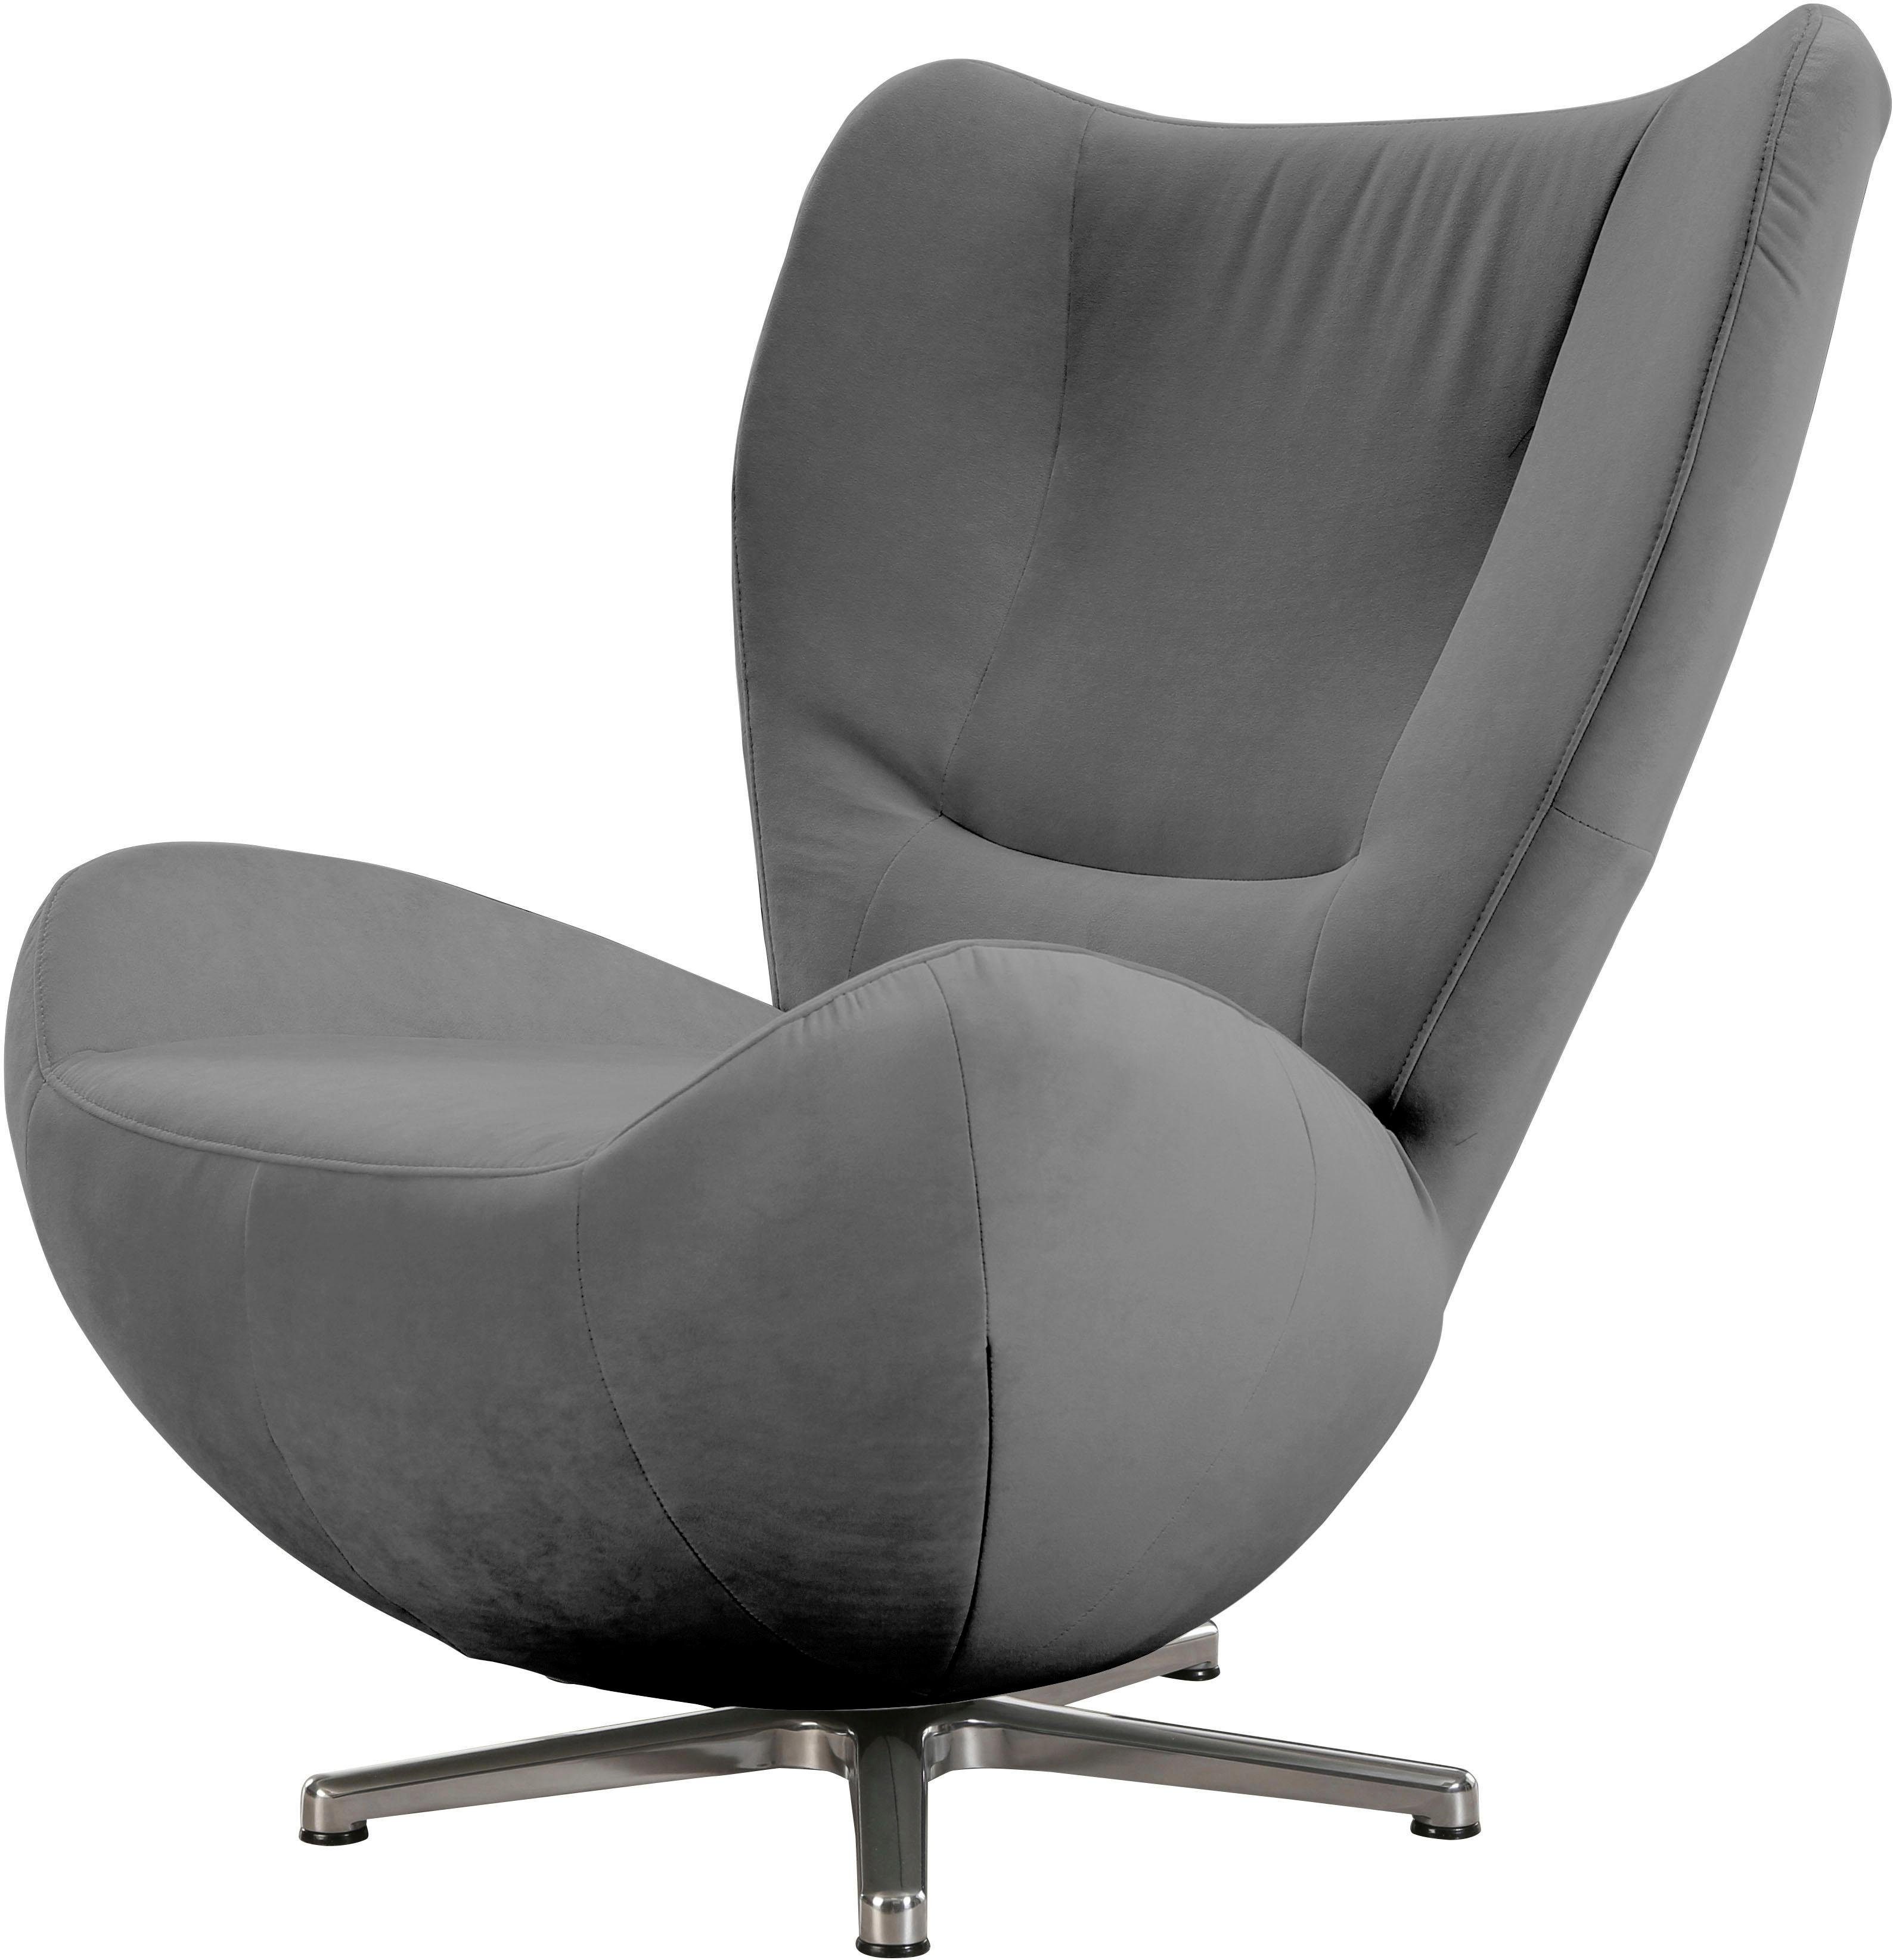 TOM TAILOR Loungesessel Metall-Drehfuß Chrom HOME mit in TOM PURE